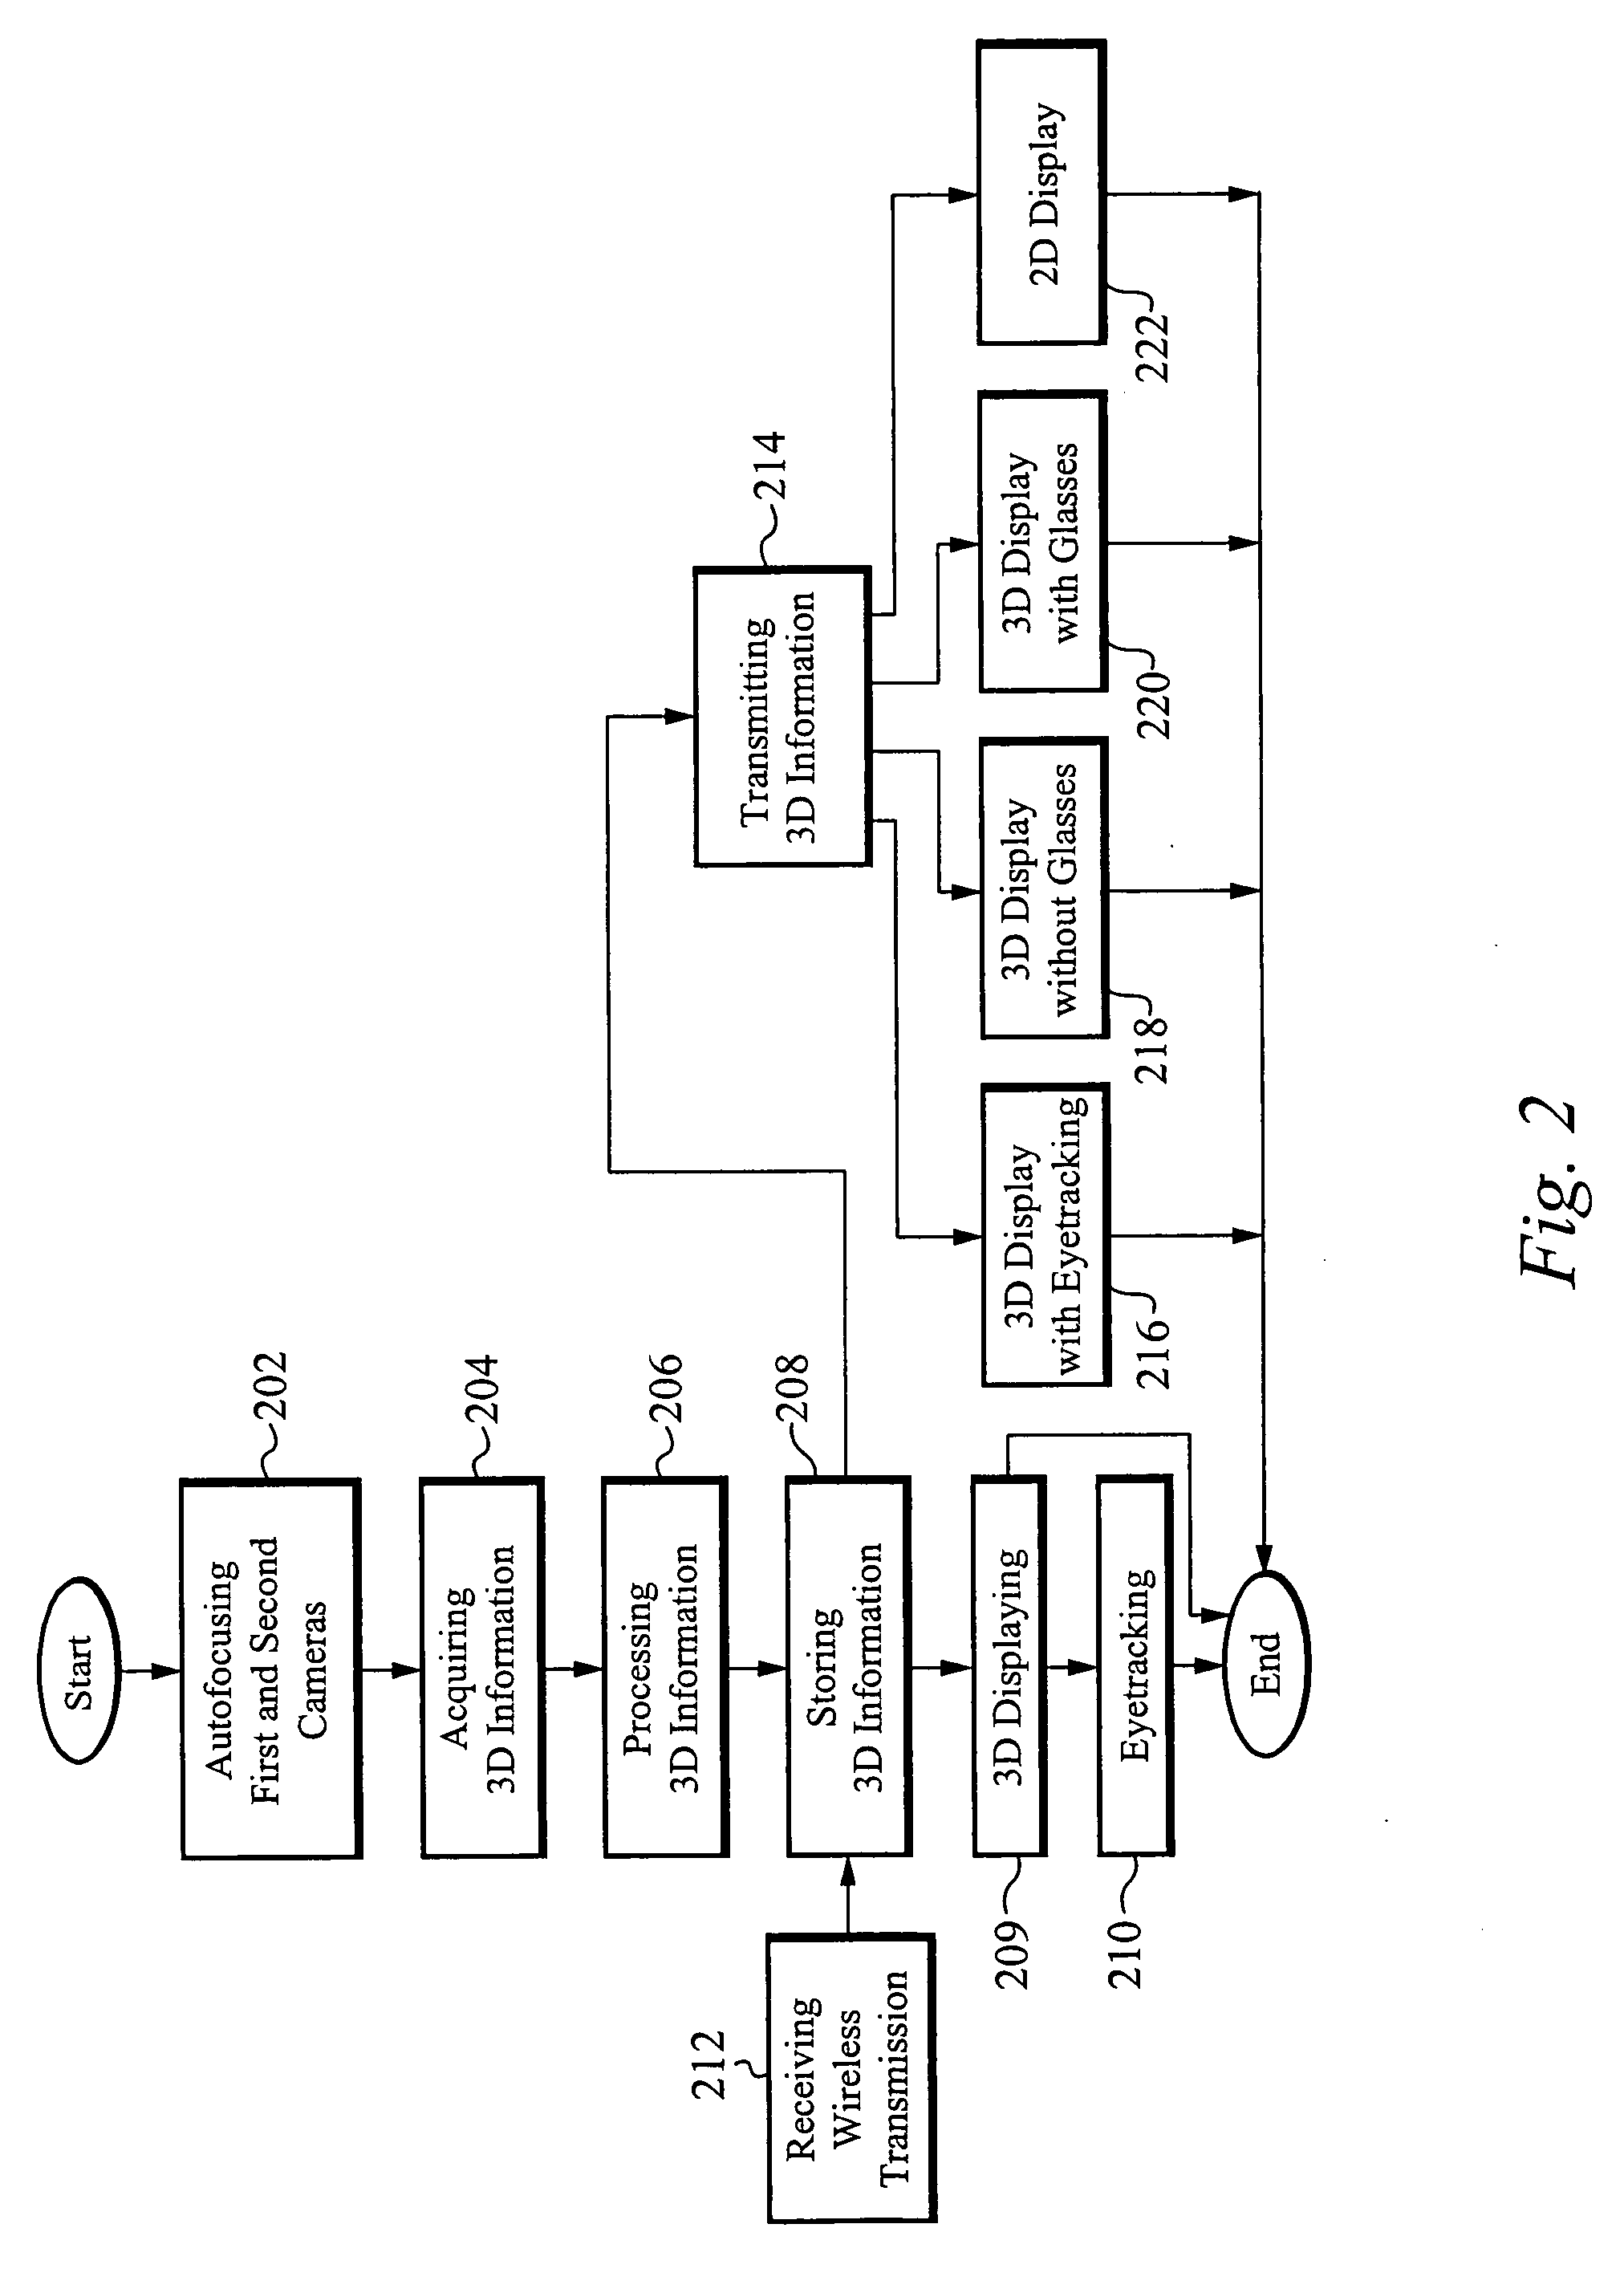 Three dimensional acquisition and visualization system for personal electronic devices